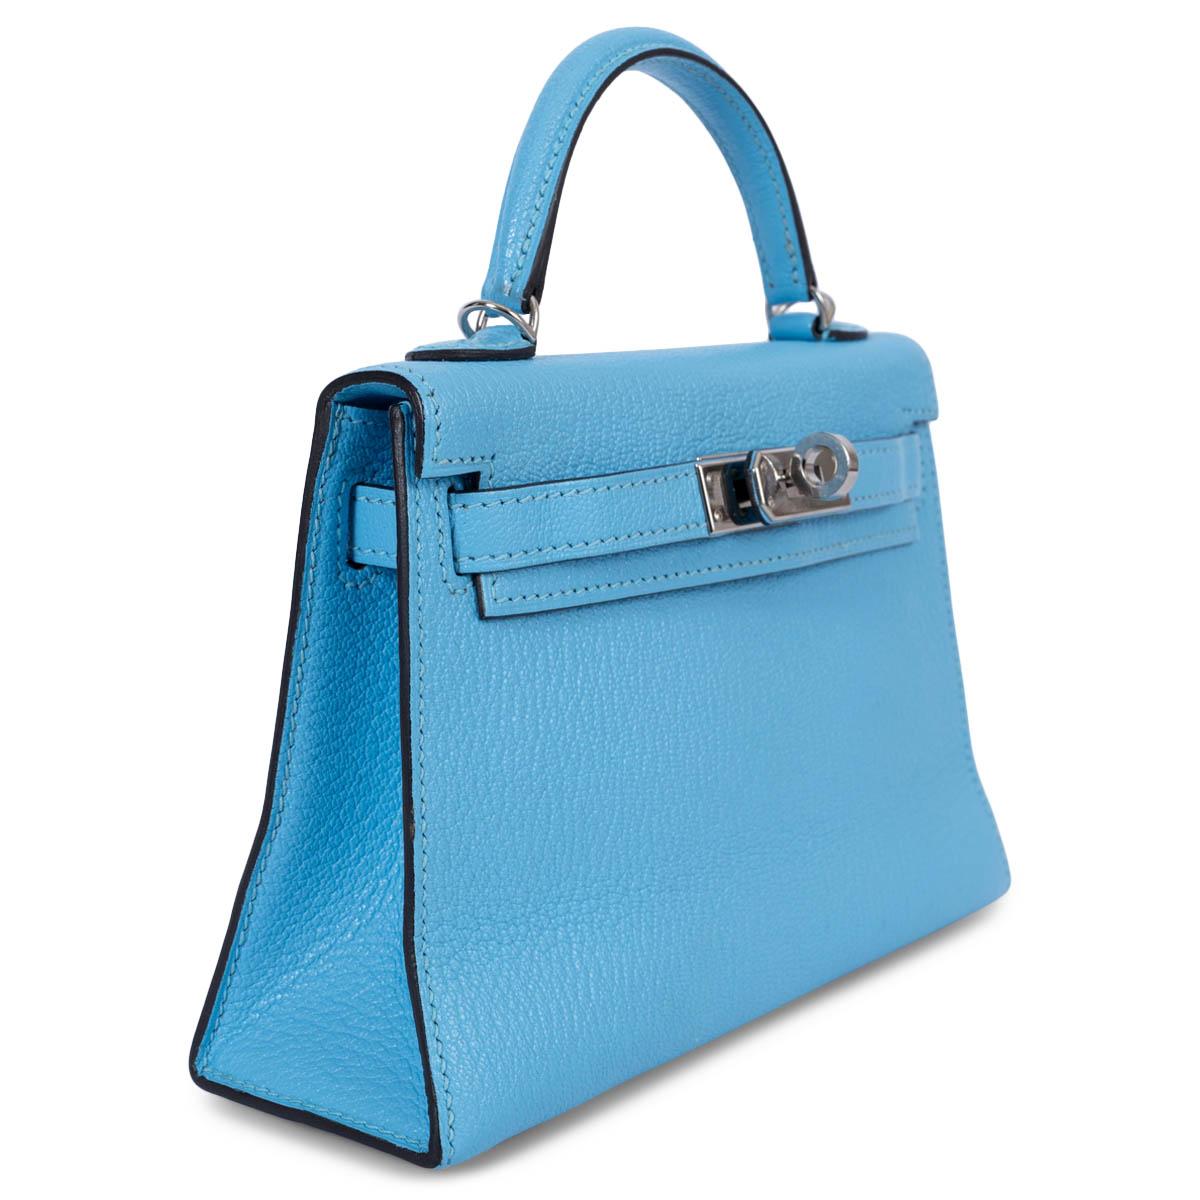 100% authentic Hermès Kelly 20 Sellier Bag in Celeste blue chèvre Mysore leather featuring Palladium hardware. Lined in chèvre leather with one patch pocket against the back. Has been carried and is in excellent condition. Comes with shoulder strap,